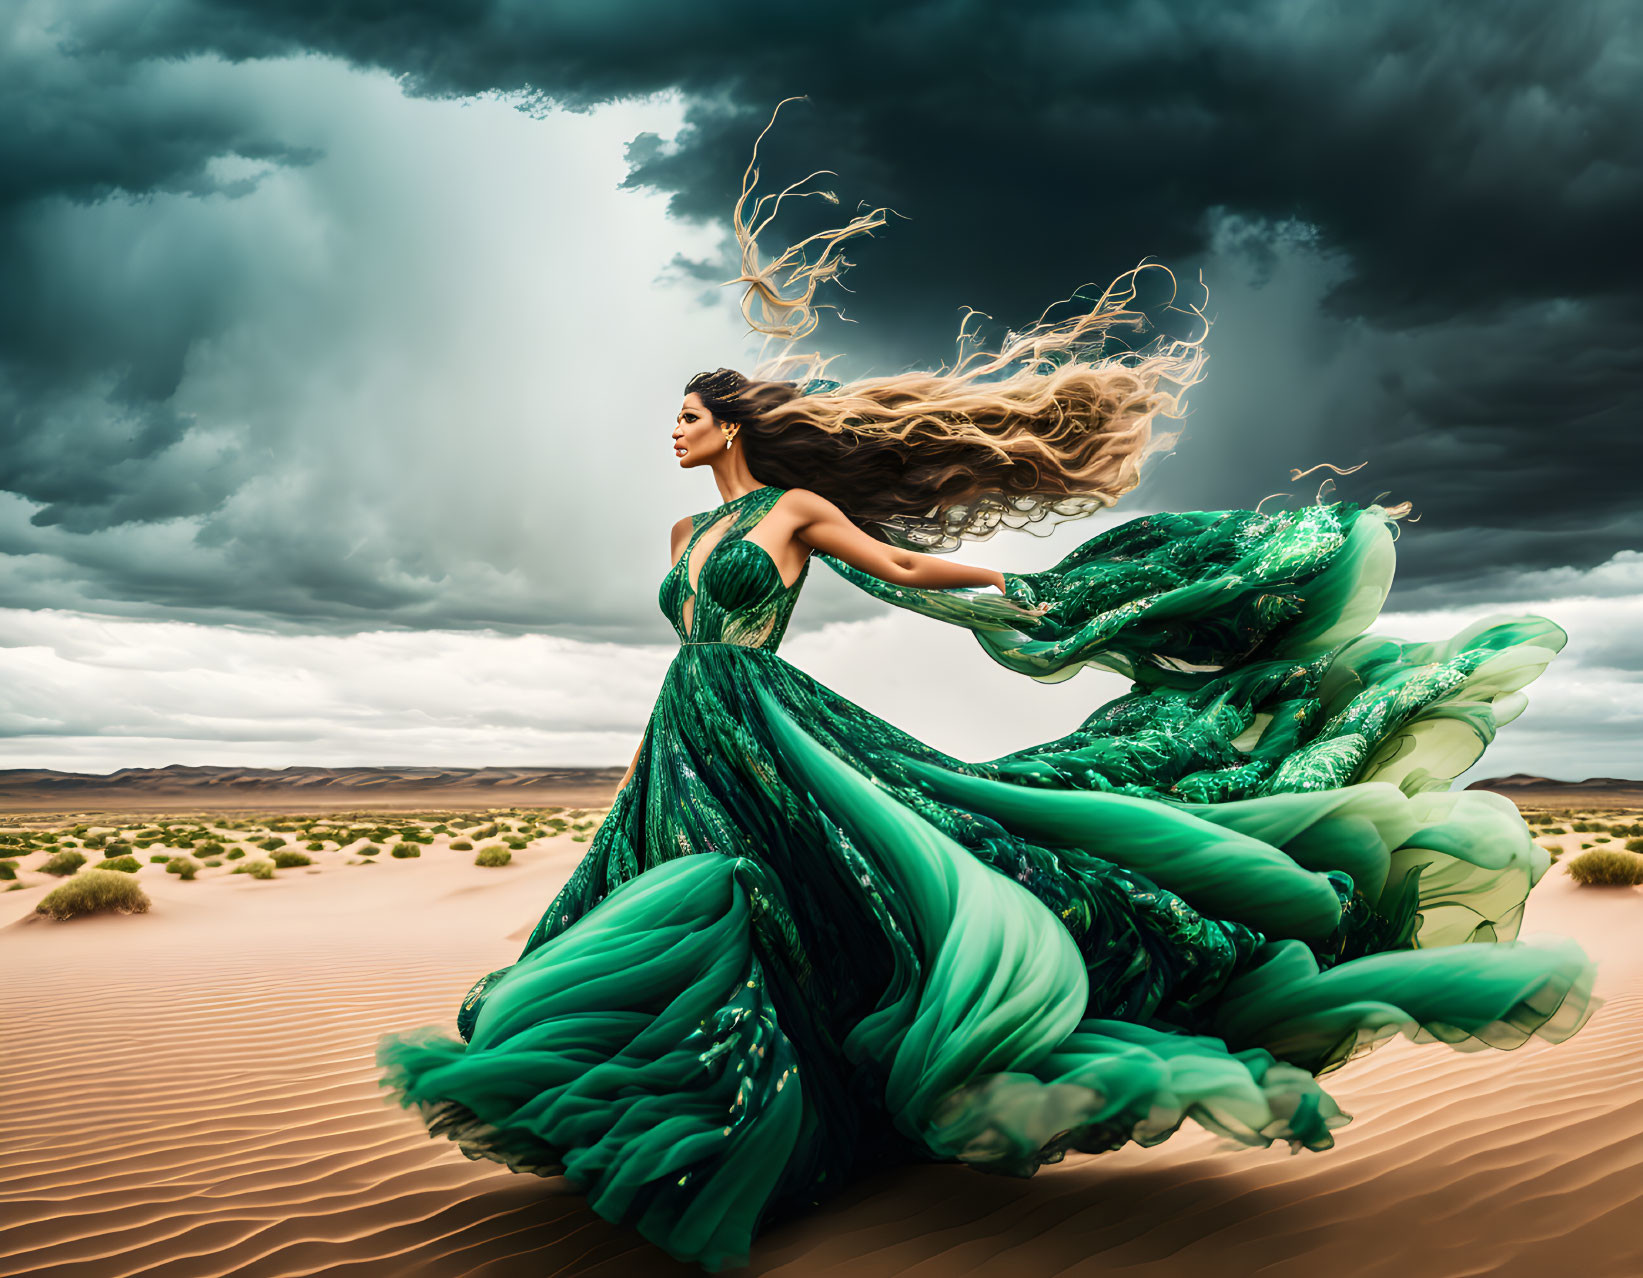 Woman in flowing green dress in desert with dark clouds, creating dramatic scene